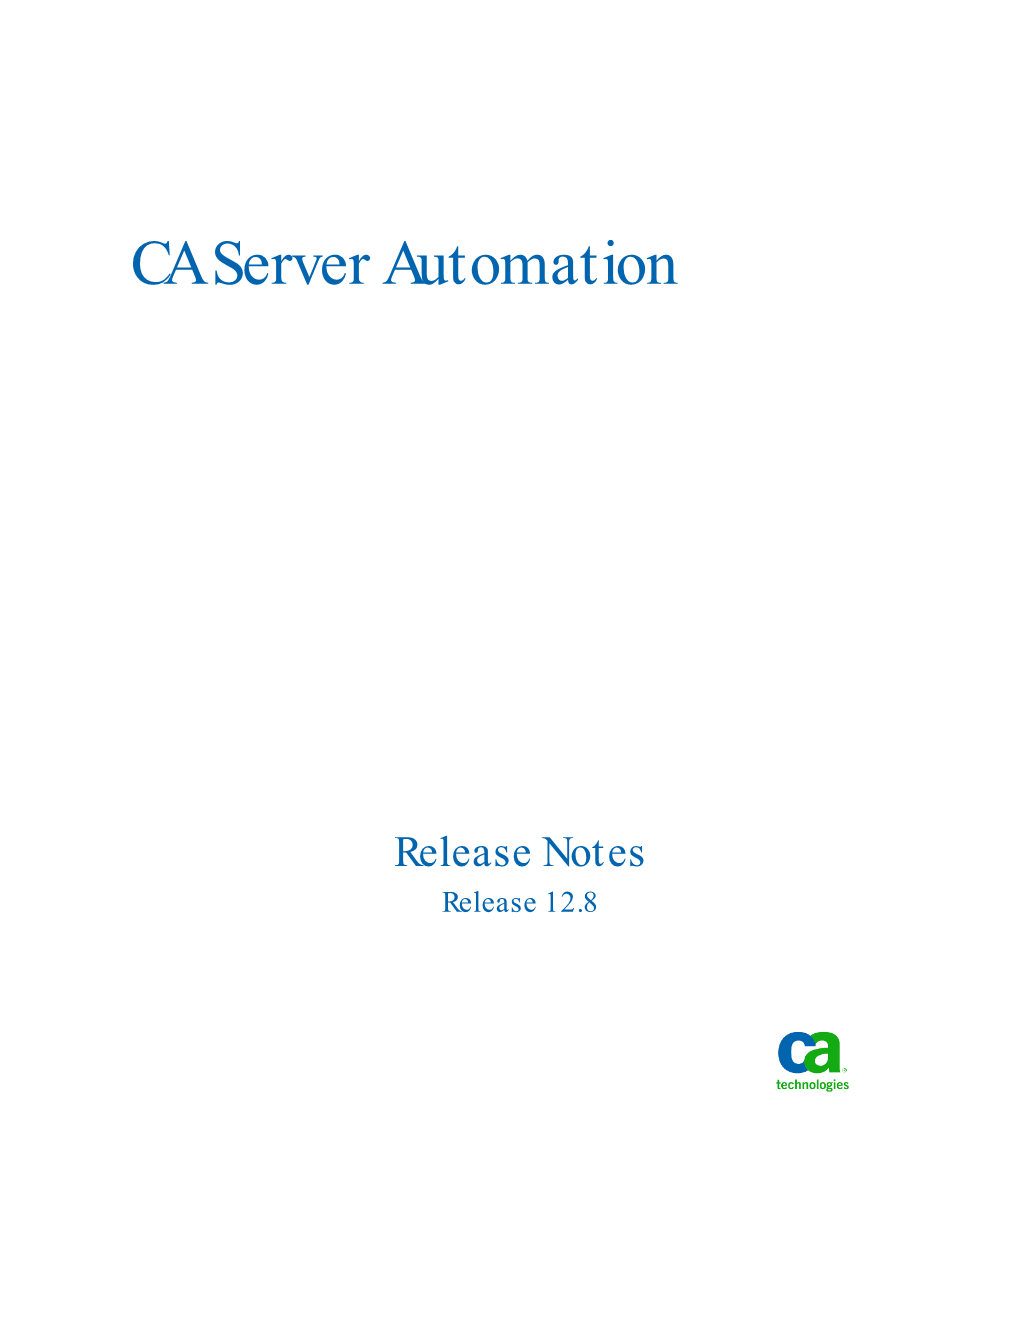 CA Server Automation Release Notes, See the Bookshelf at CA Support Online